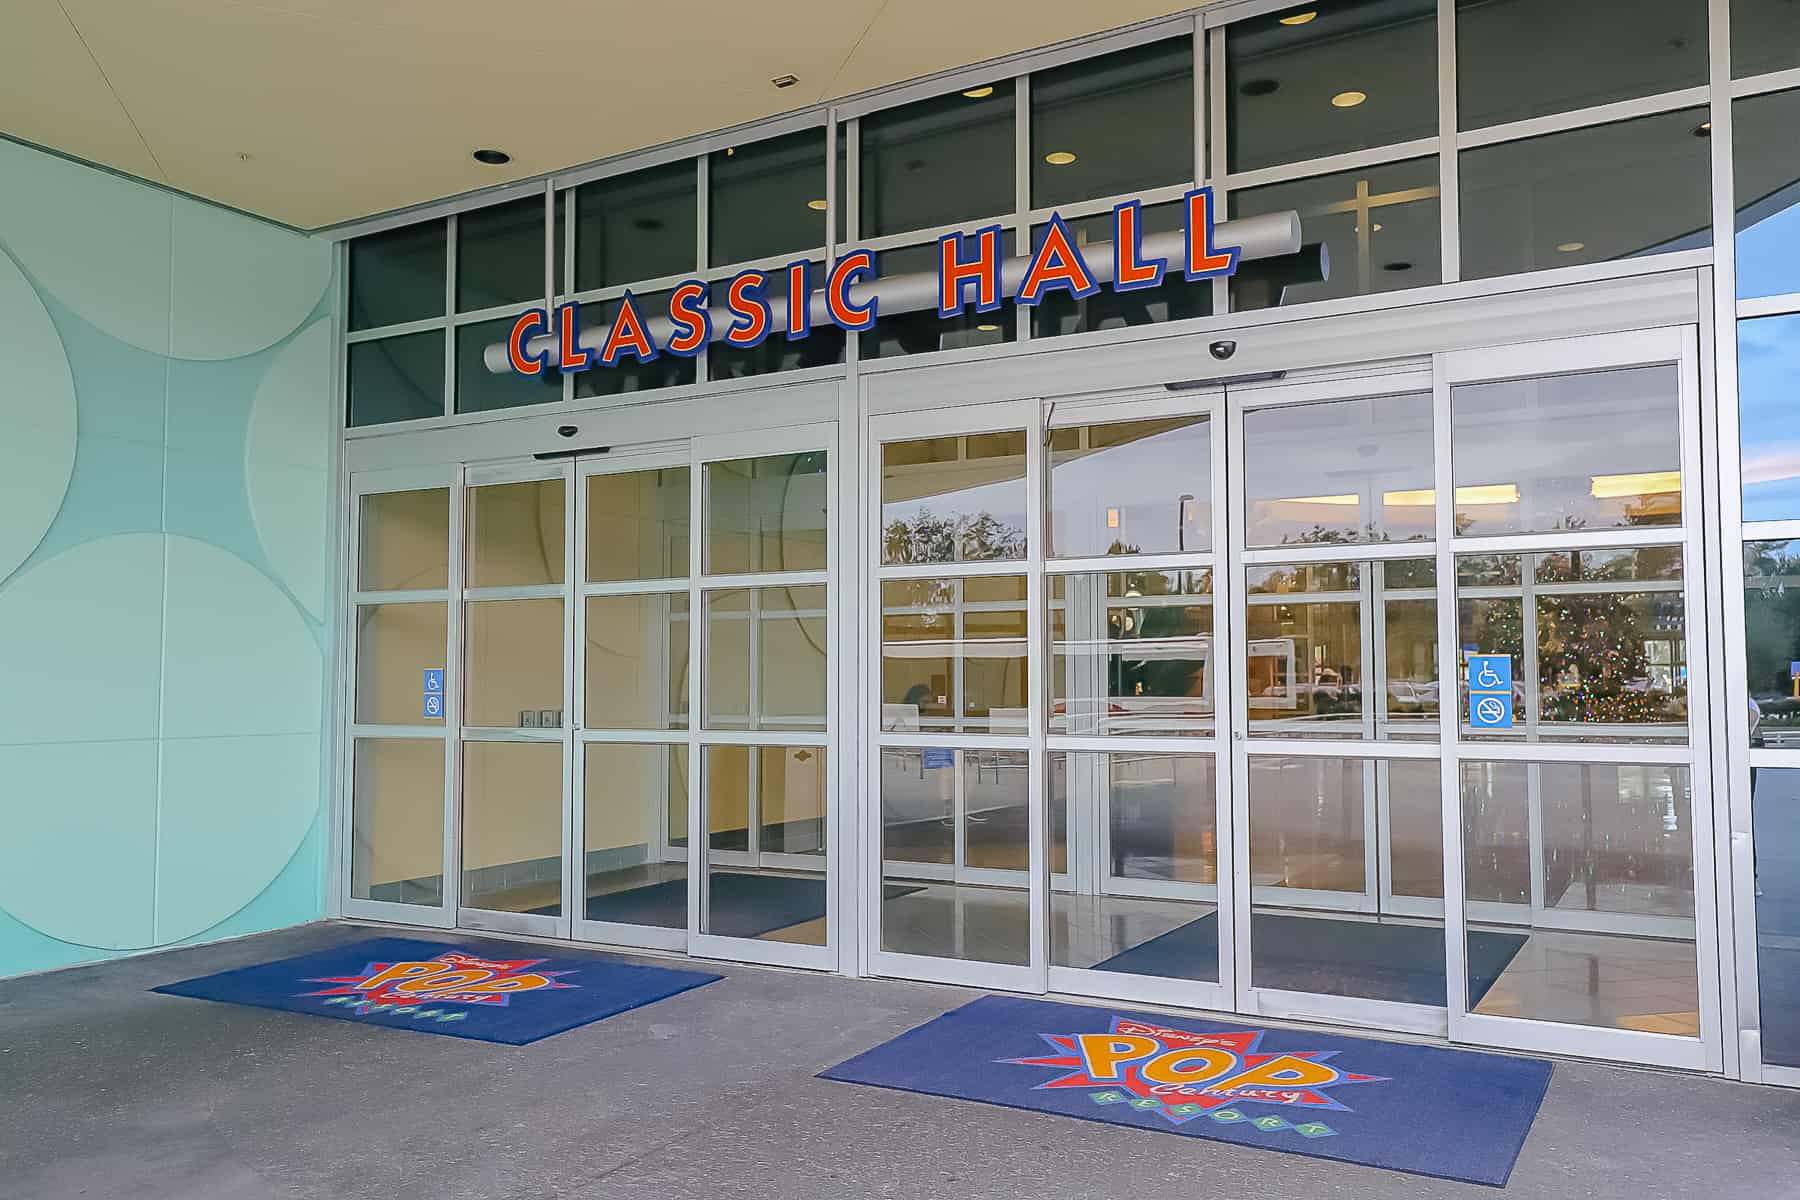 the entrance to Classic Hall at Pop Century 